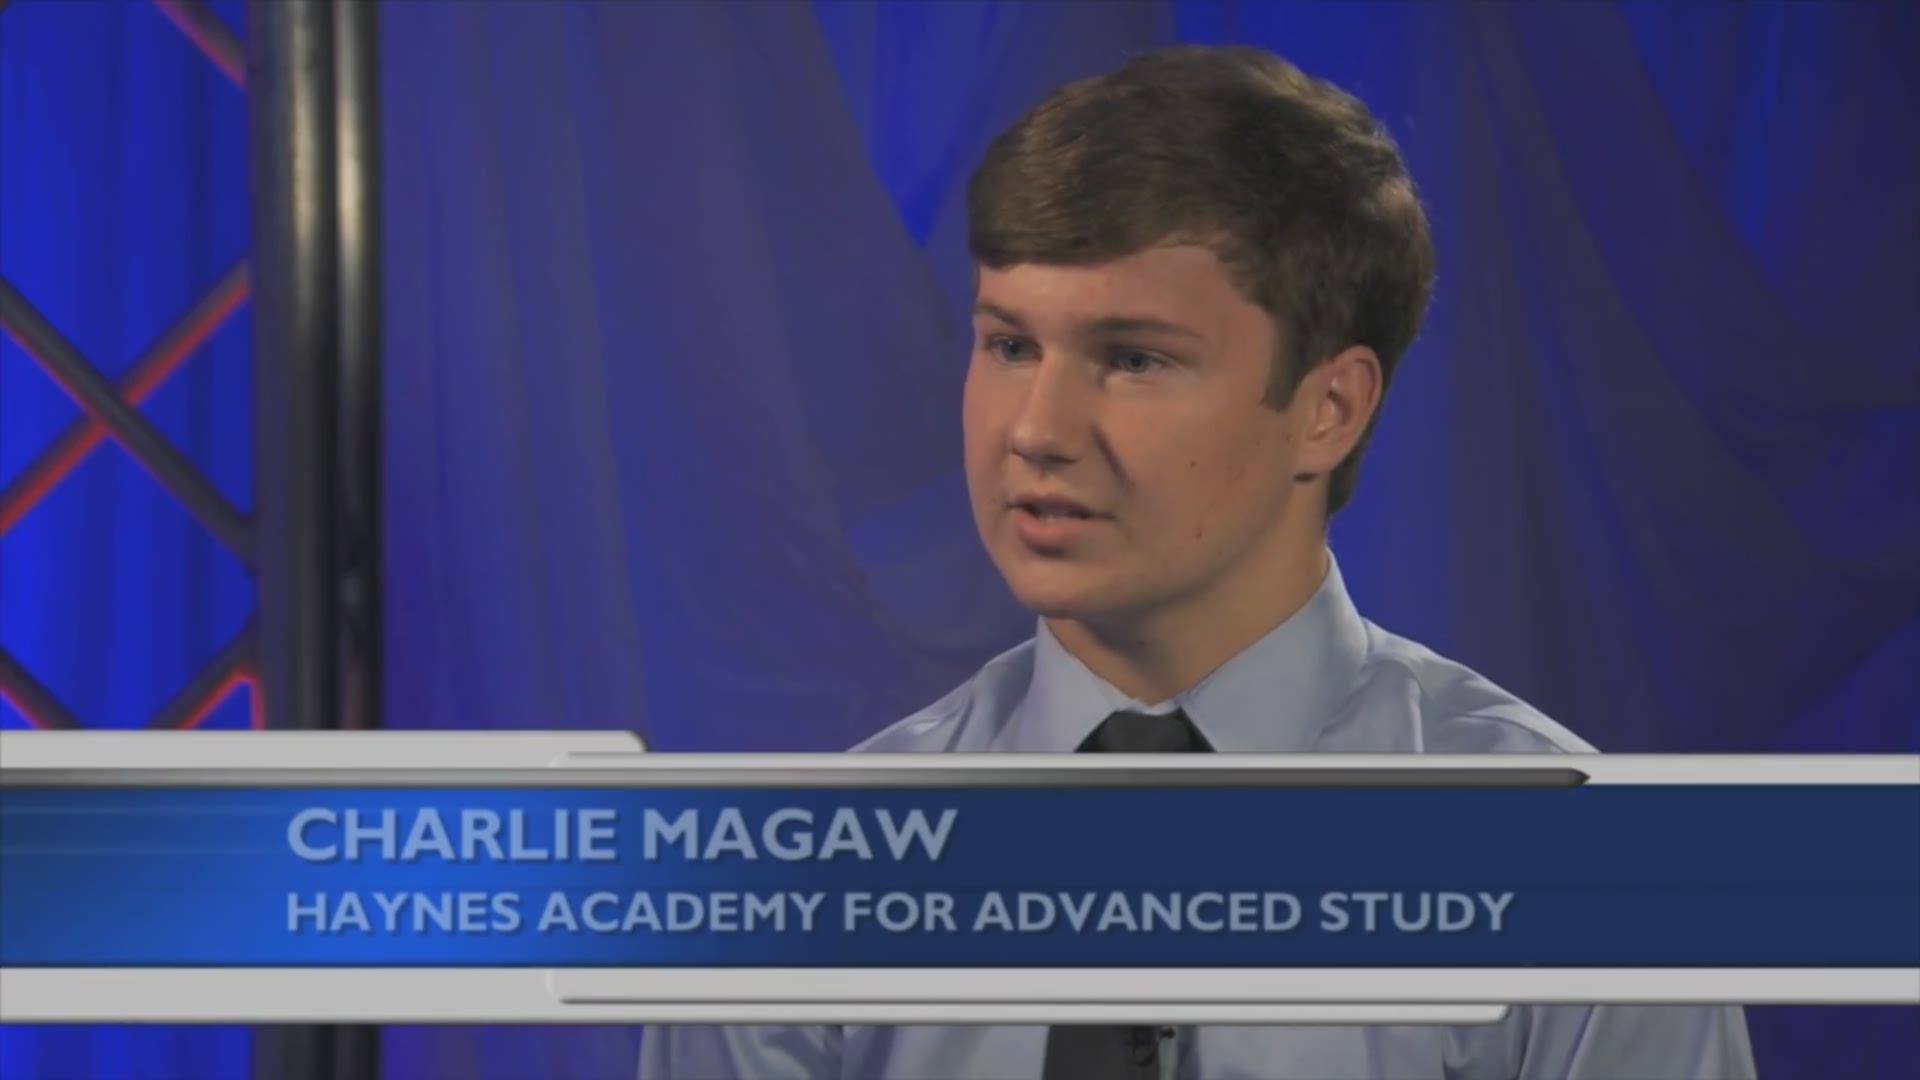 Charlie Magaw of Haynes Academy is one of our A+ Athletes